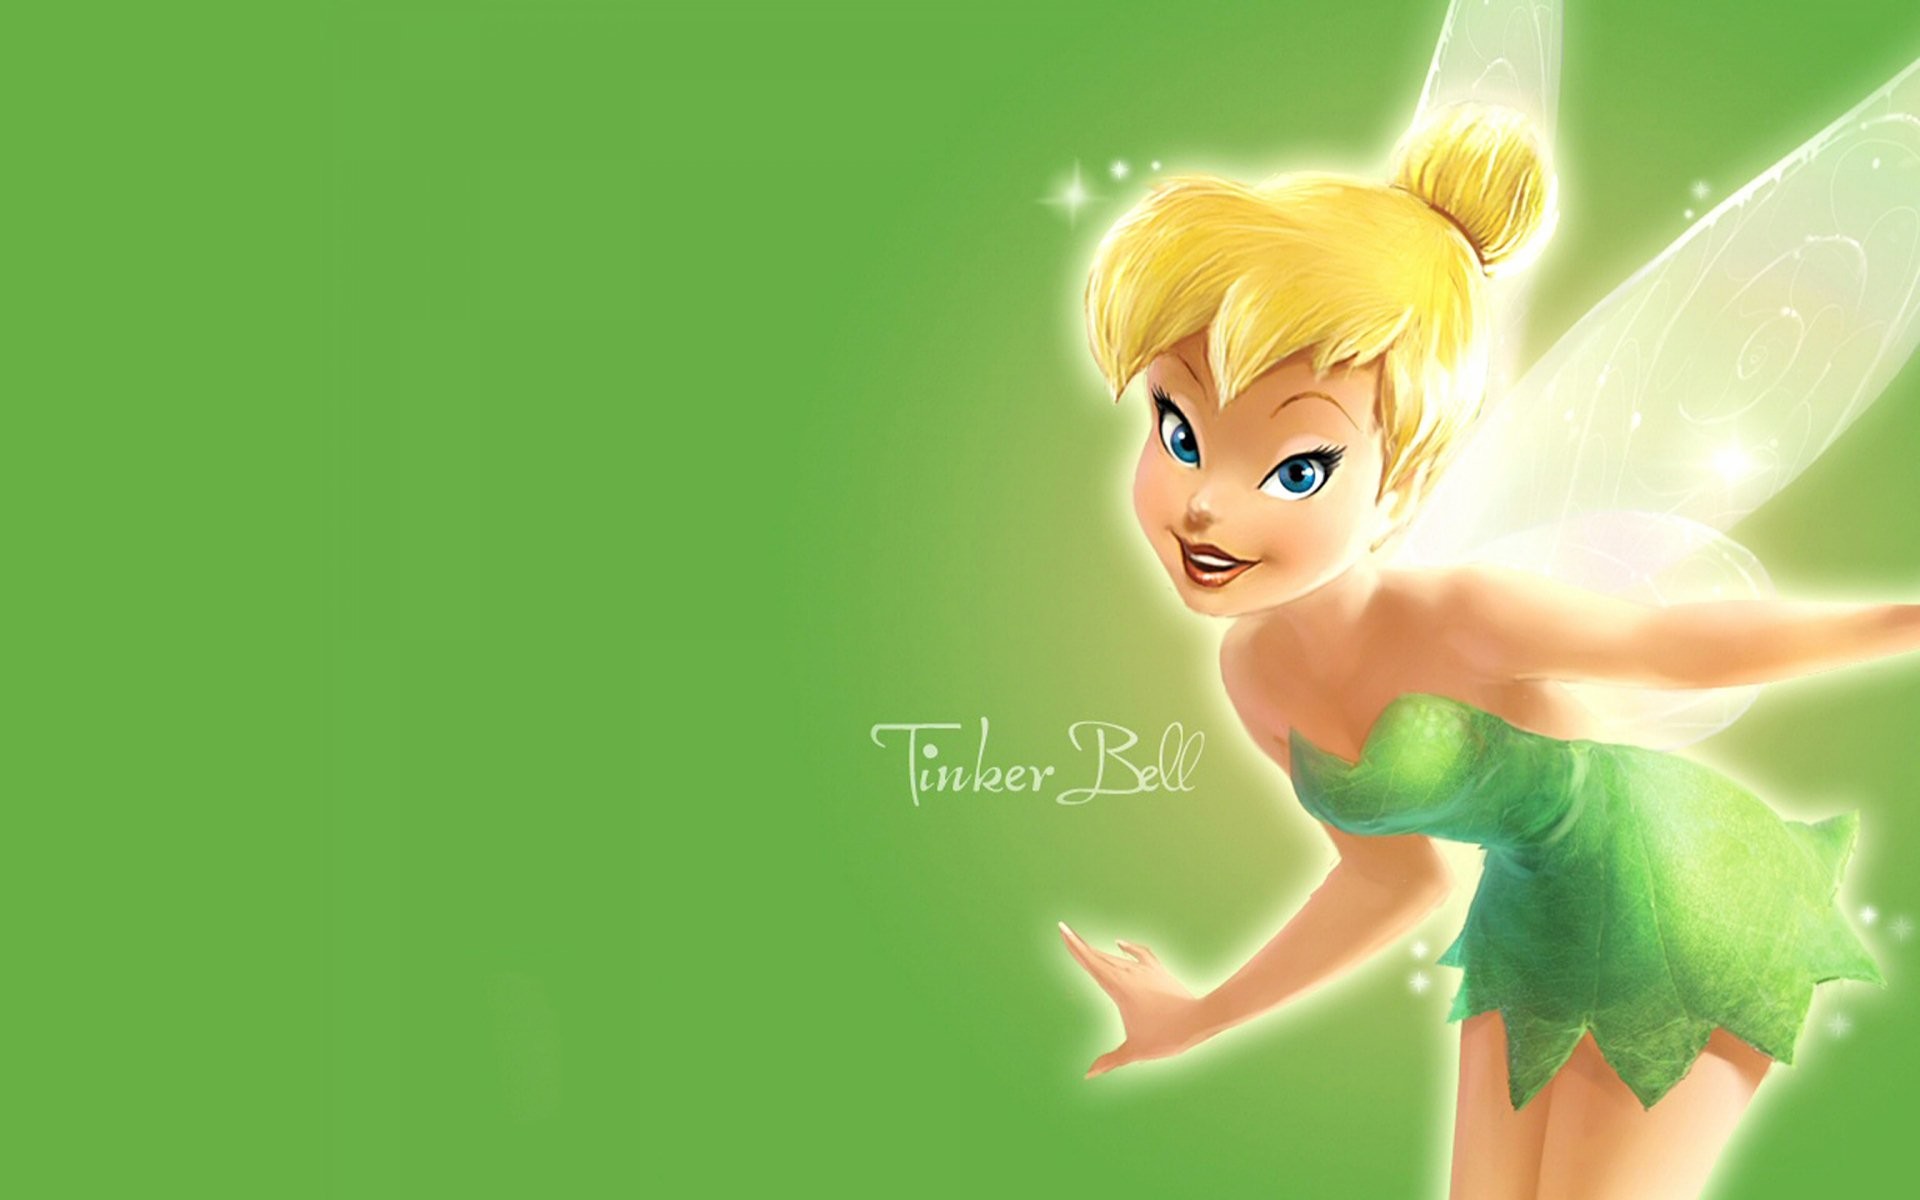 1920x1200 Explore More Wallpapers in the Tinker Bell Subcategory!